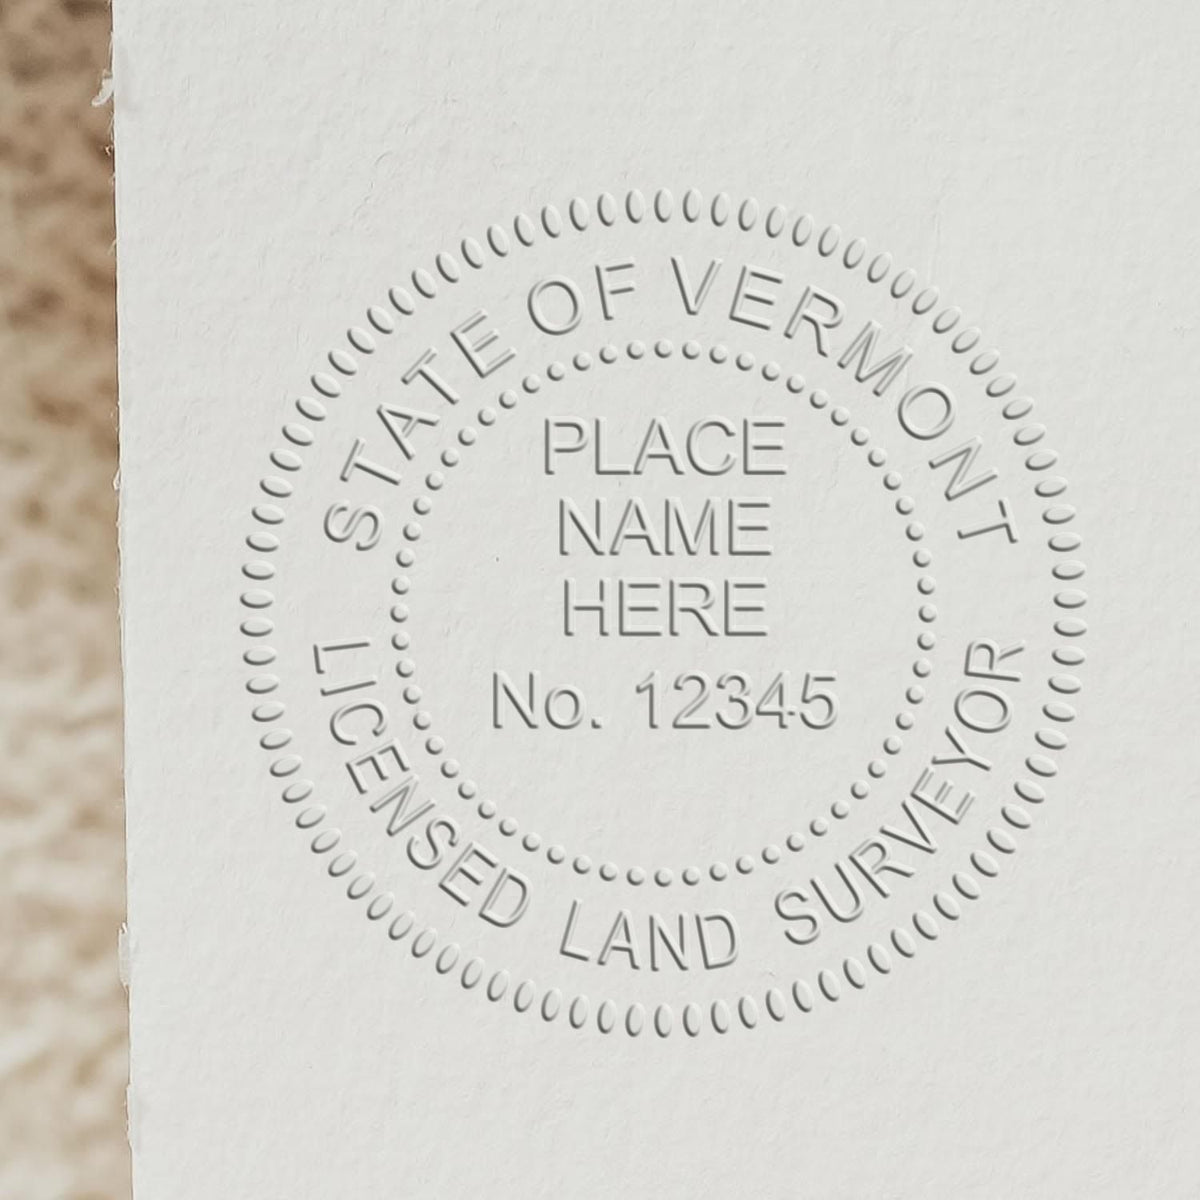 The Gift Vermont Land Surveyor Seal stamp impression comes to life with a crisp, detailed image stamped on paper - showcasing true professional quality.